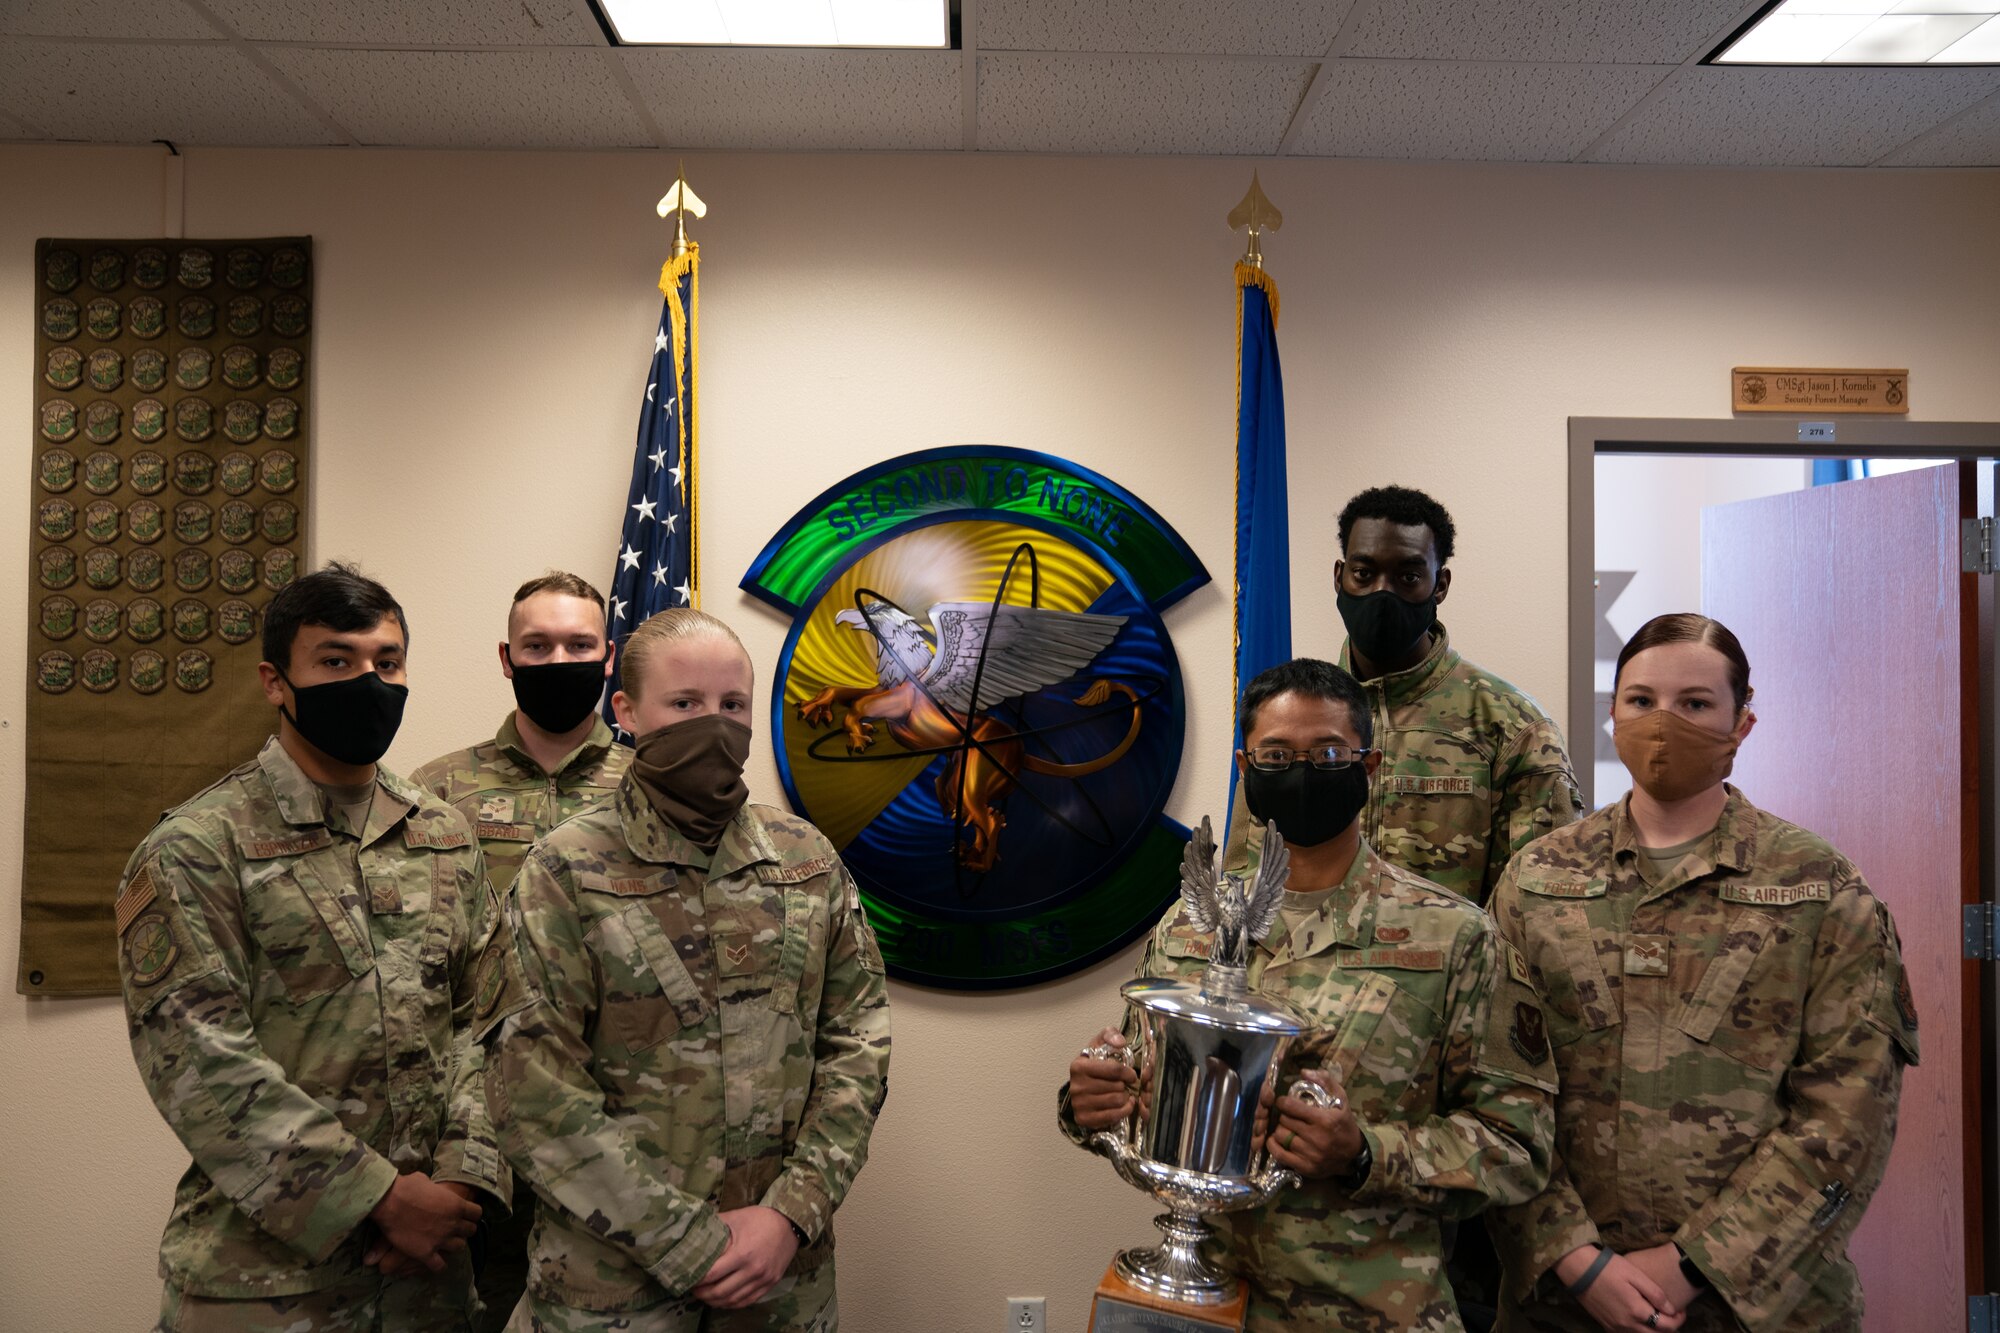 The 790th Missile Security Forces Squadron Airmen pose for photos with the Cheyenne Trophy on F.E. Warren Air Force Base, Wyoming, Sept. 10, 2020. The Greater Cheyenne Chamber of Commerce recently presented the Military Affairs Committee’s Cheyenne Trophy to the 790th Missile Security Force Squadron for mission accomplishments, patriotism, off-duty volunteerism and community involvement resulting in a positive impact on the city of Cheyenne and its residents. (U.S. Air Force photos by Joseph Coslett)